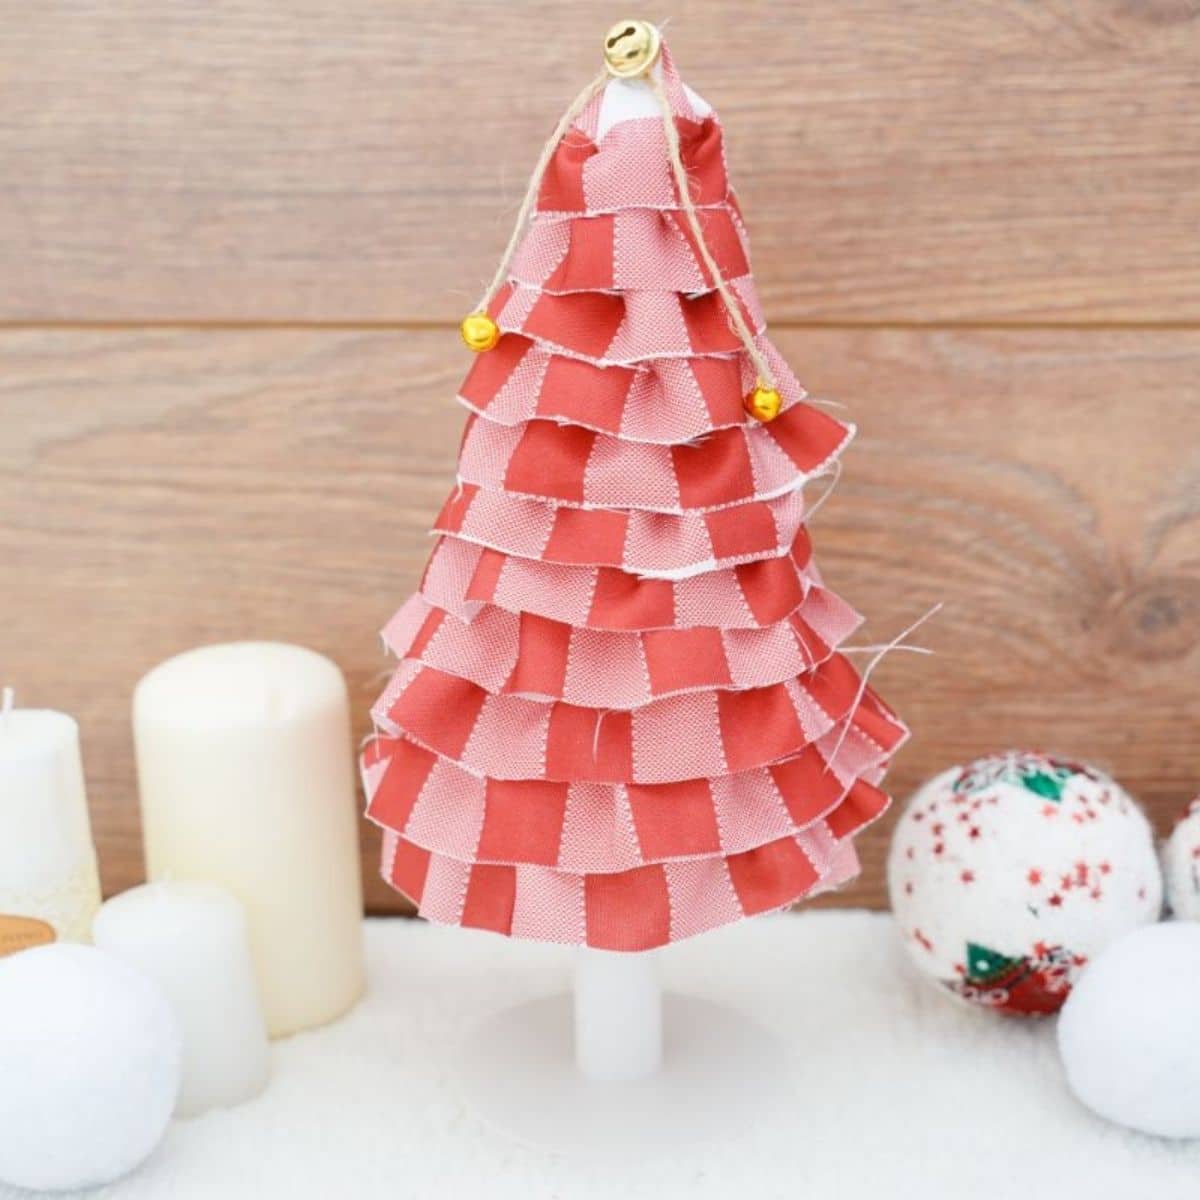 miniature holiday tree with red fabric on white table with candles on the side